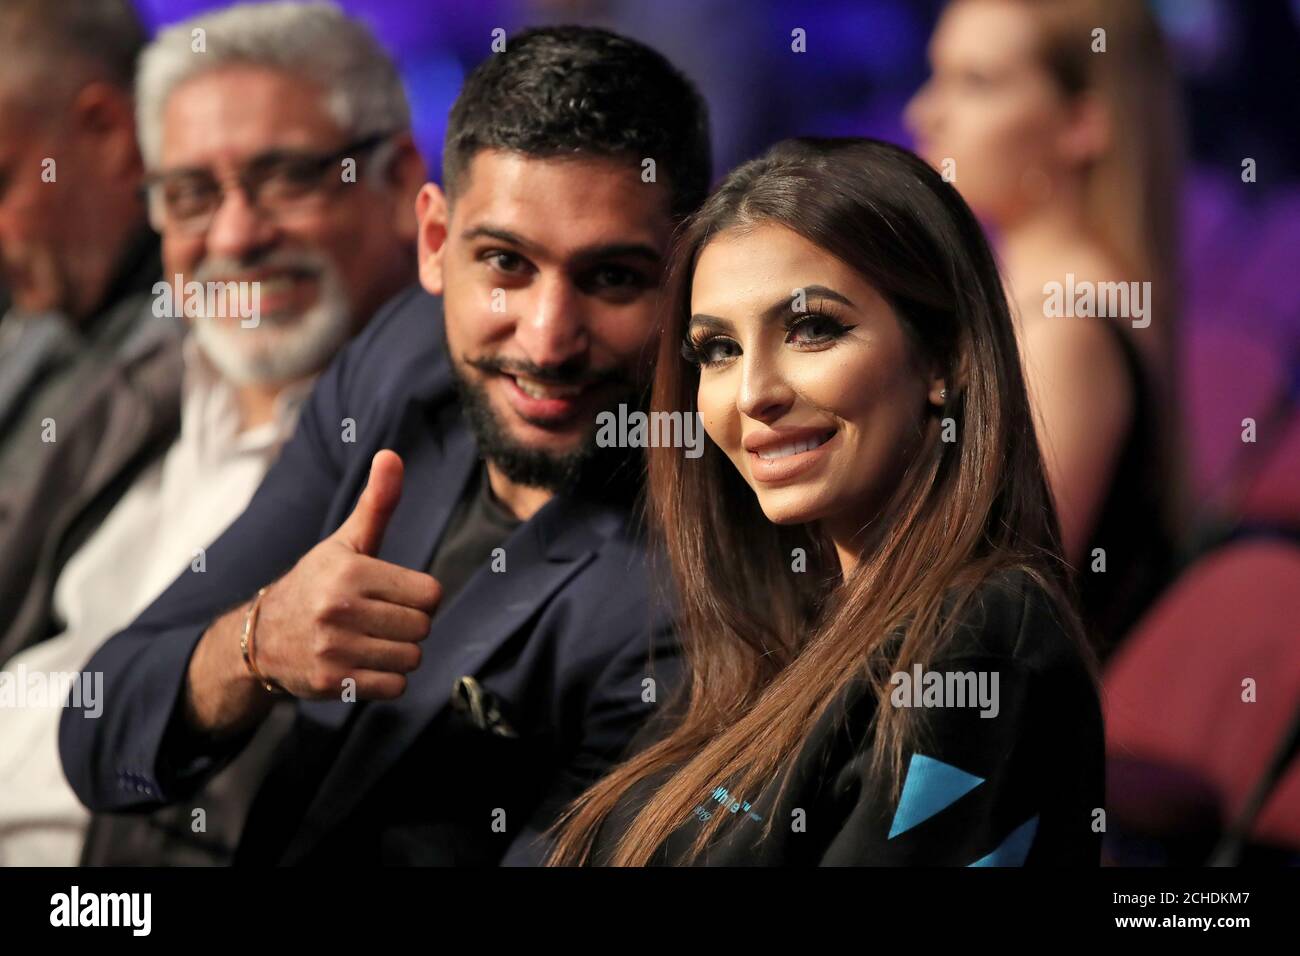 Amir Khan and wife Faryal Makhdoom at Manchester Arena. Stock Photo